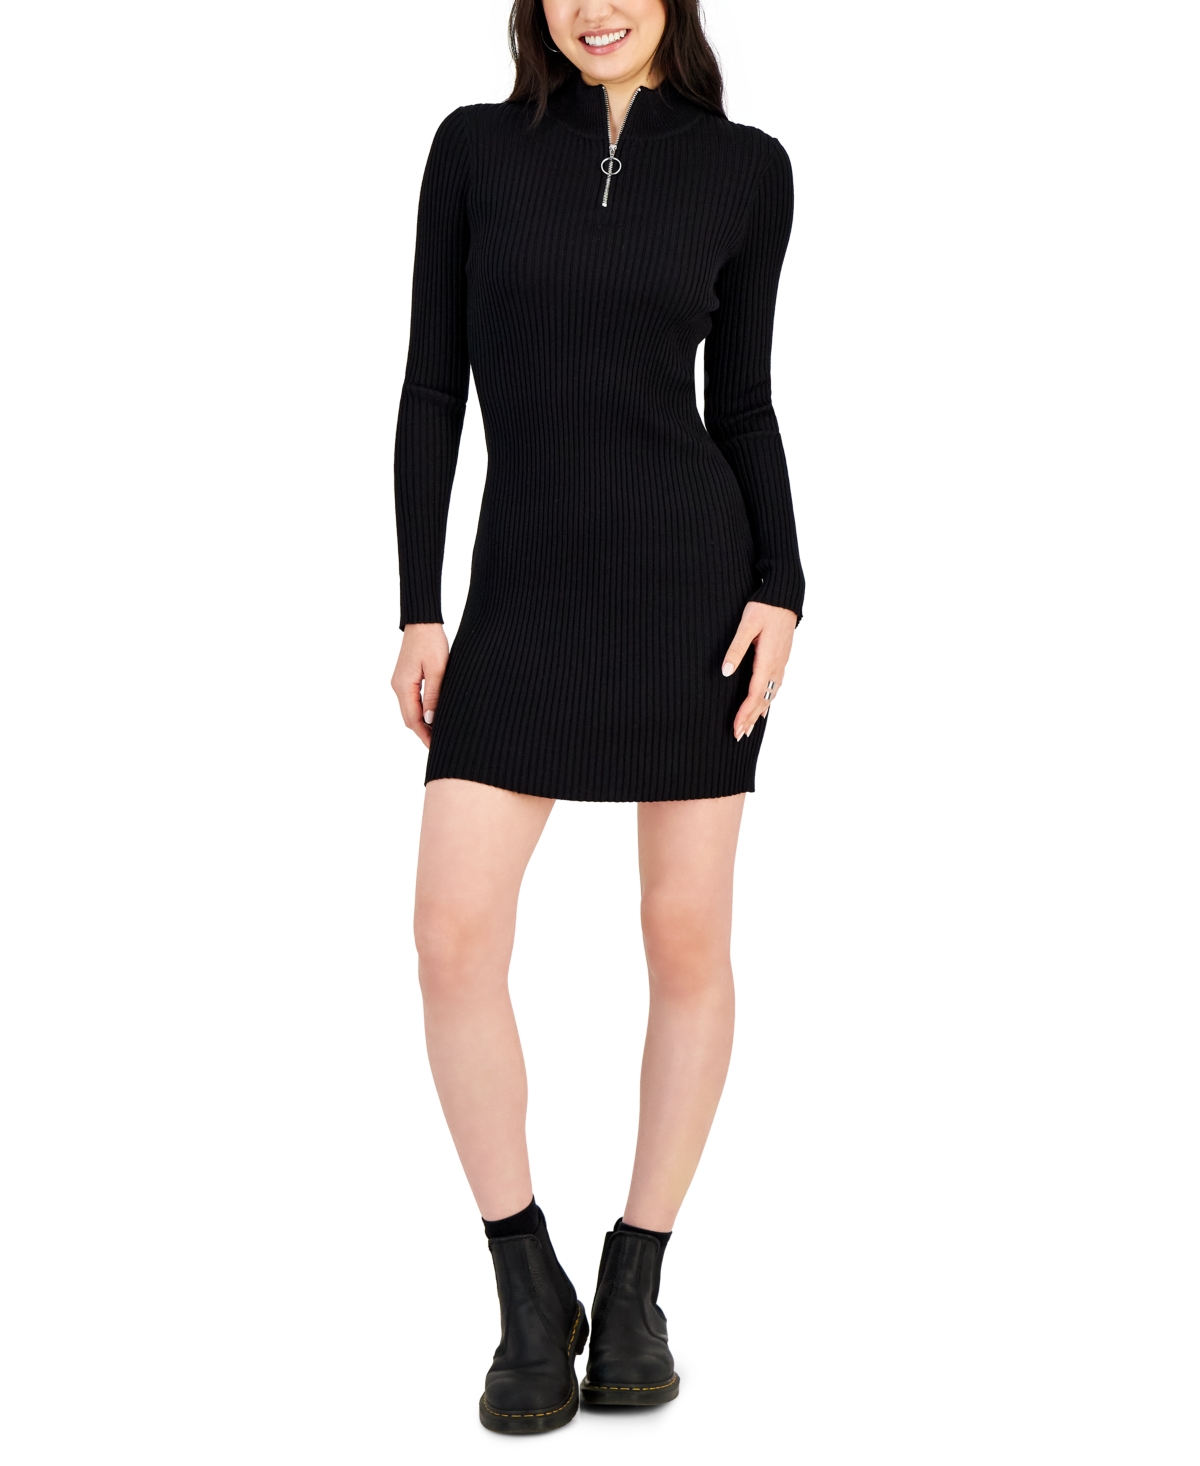 Juniors' Zip-Up Fitted Sweater Dress - Black